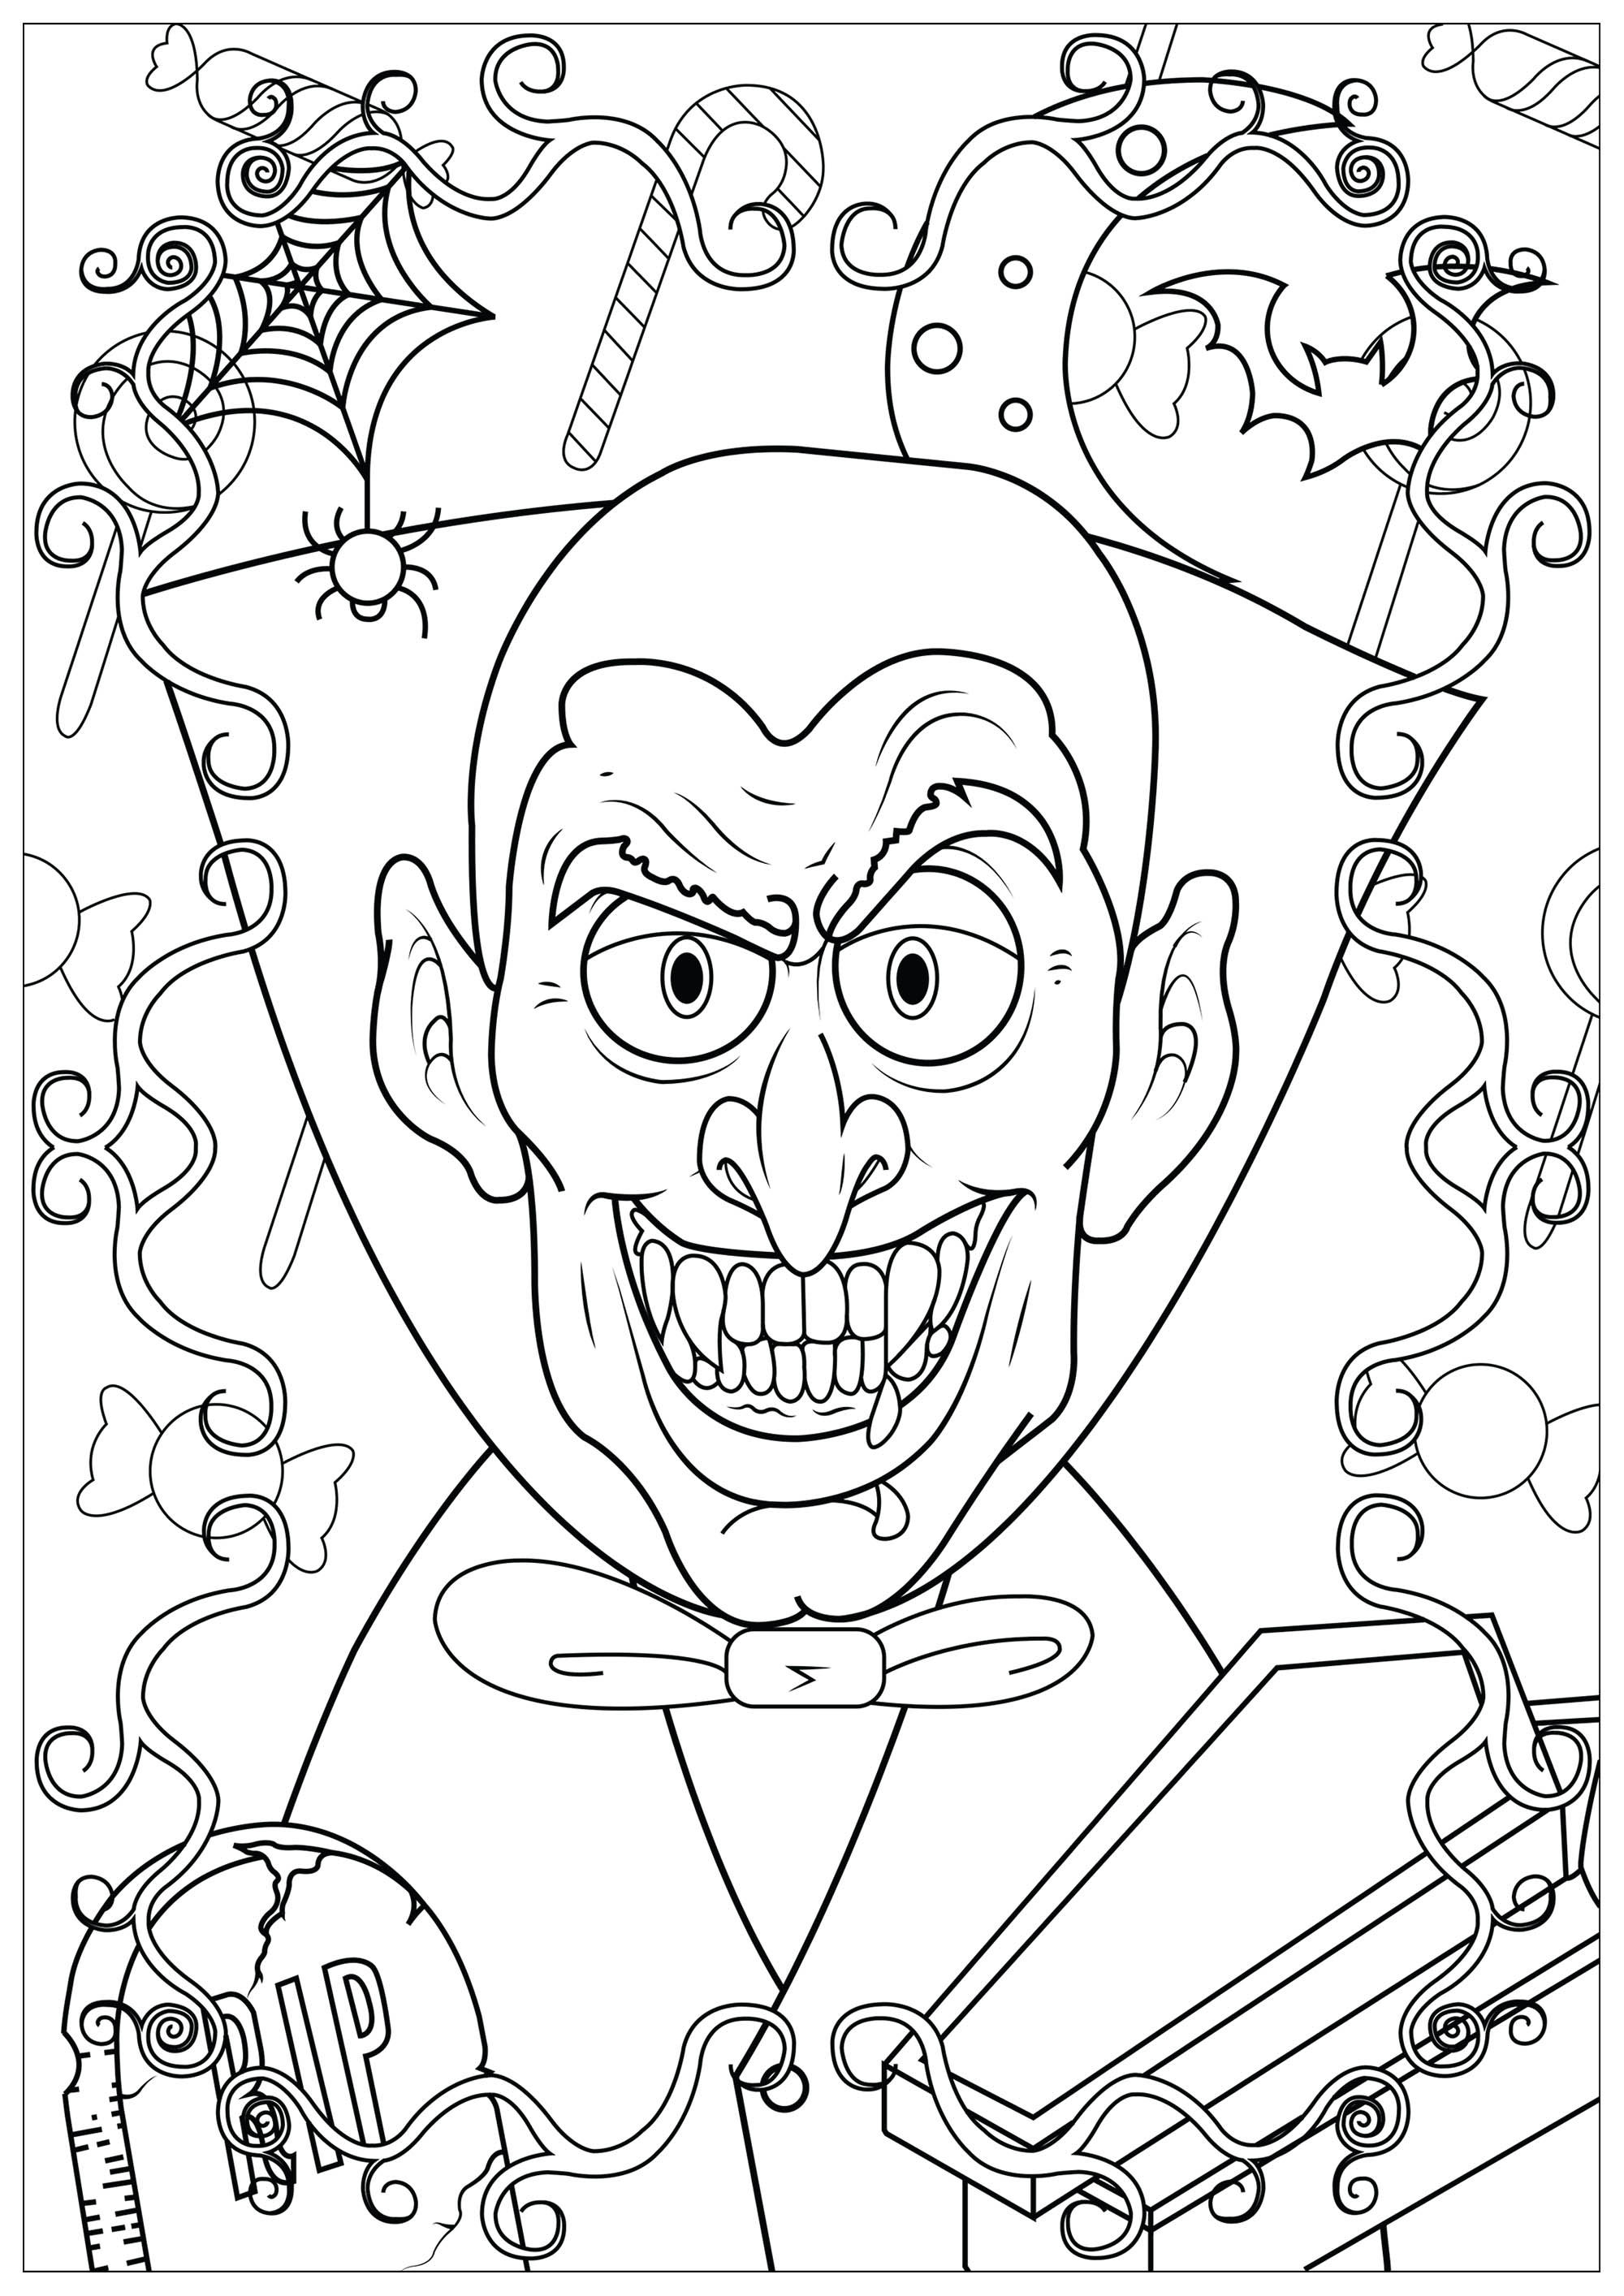 Vampire halloween   Halloween Adult Coloring Pages